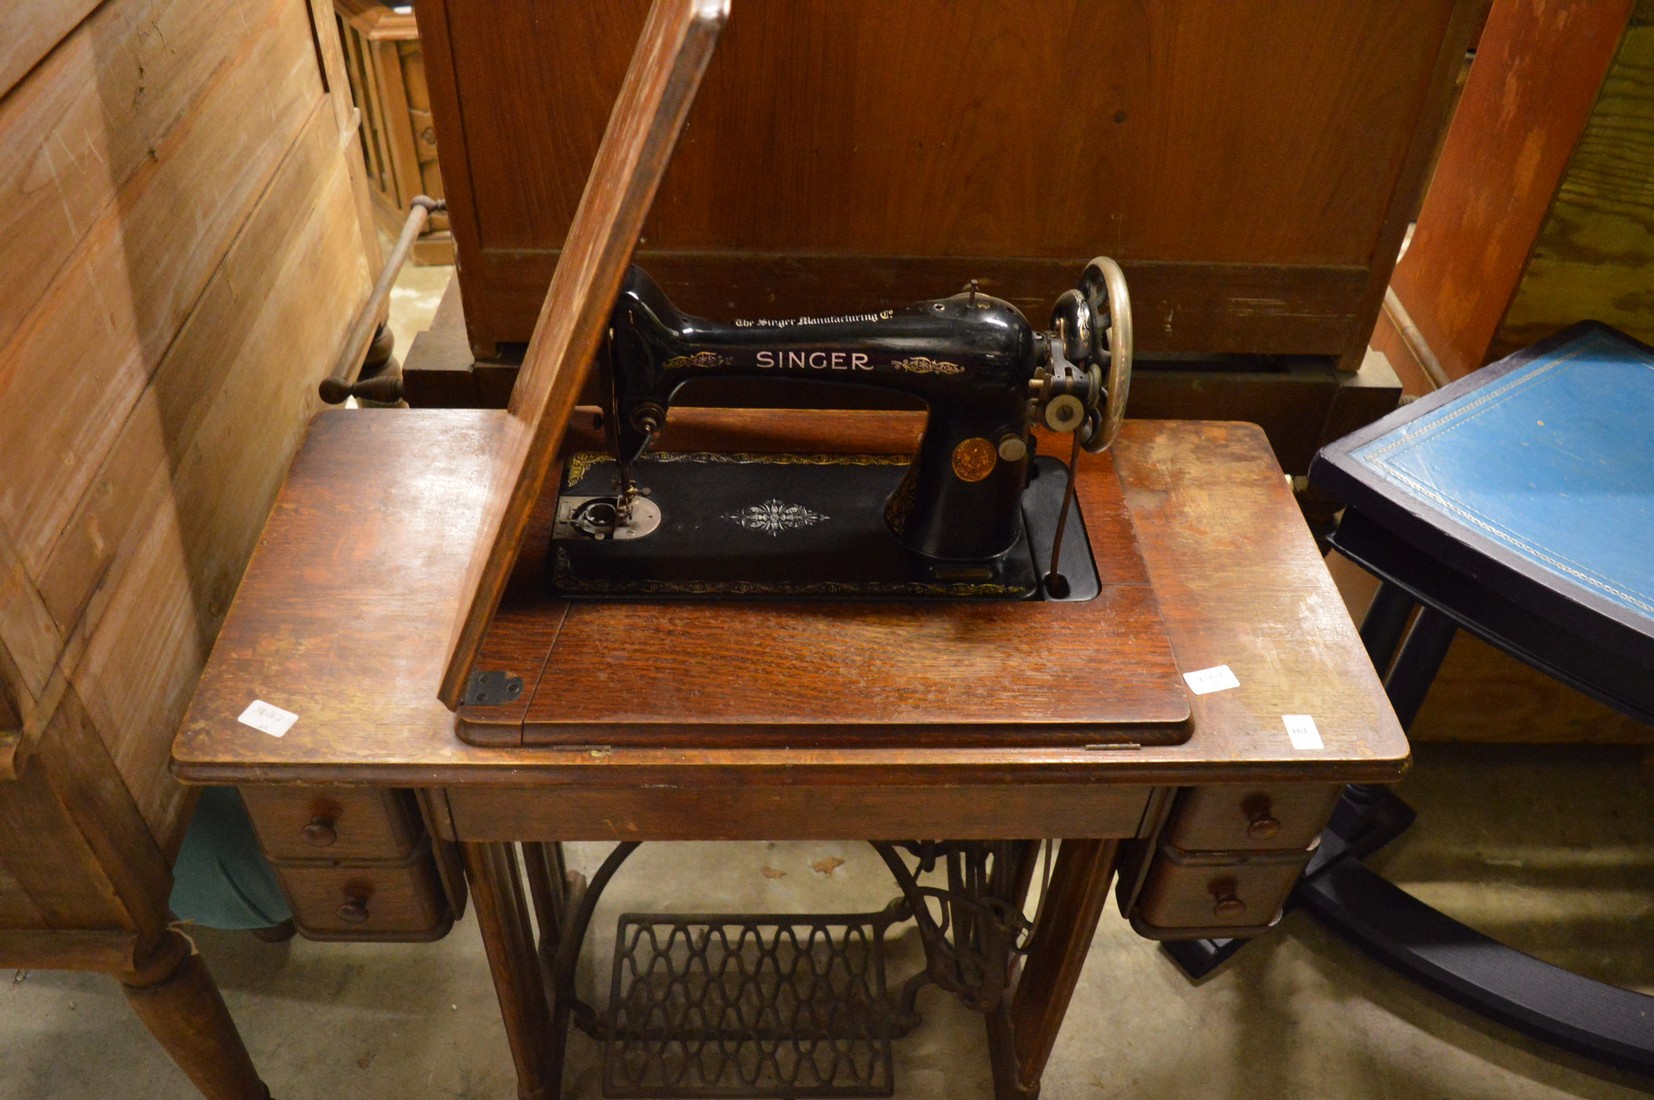 A Singer treadle operated sewing machine.